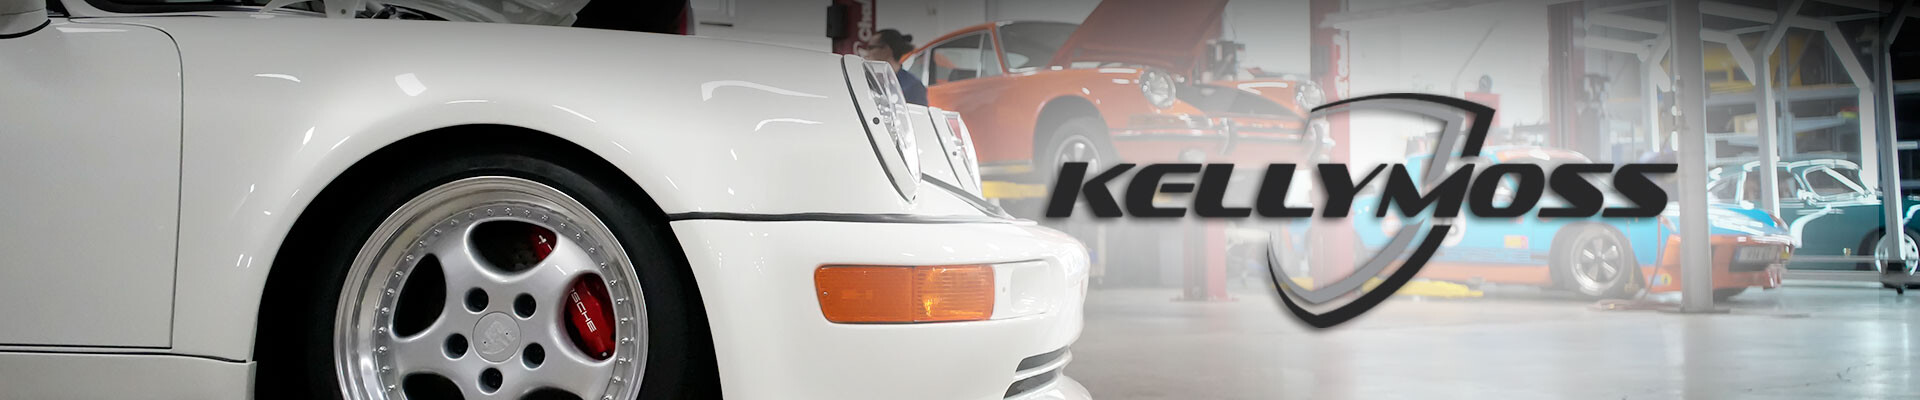 Porsche Repair in Madison, WI by Kellymoss a leading Porsche repair specialist in Wisconsin specializing in Porsche repair, maintenance, performance tuning and service.